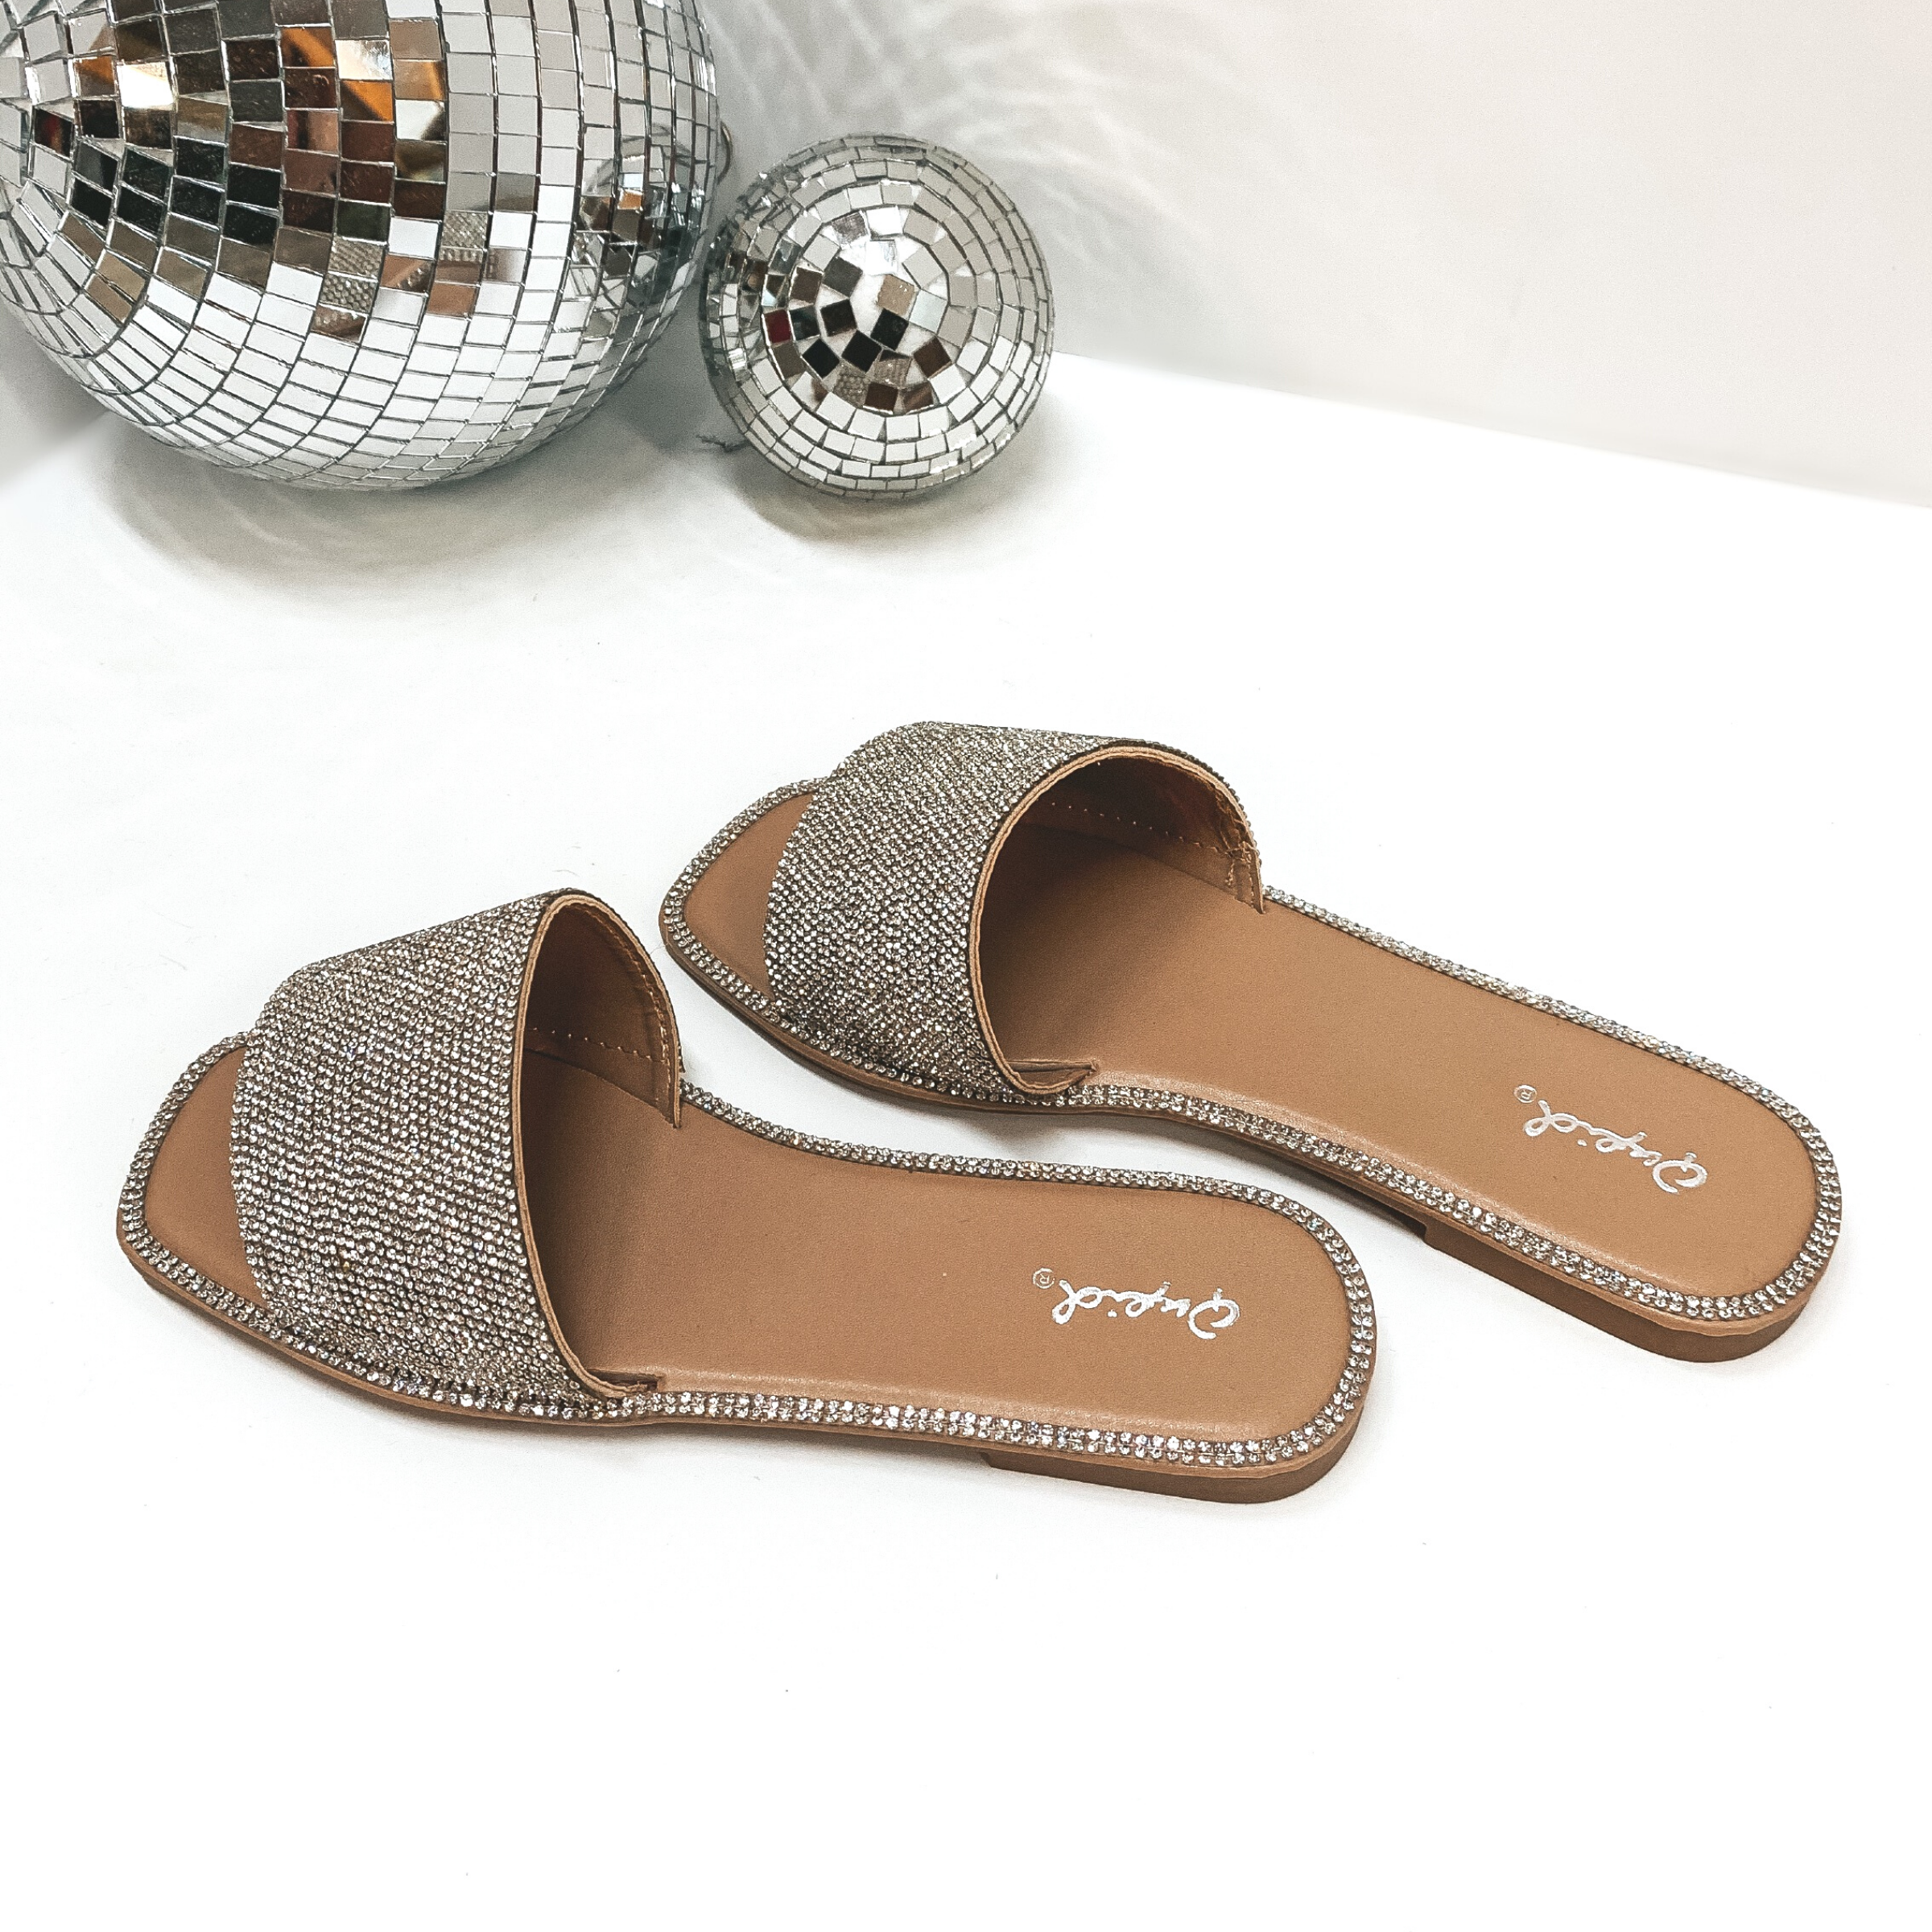 Twinkle and Shine Crystal Slide On Sandals with Crystal Trim Sole